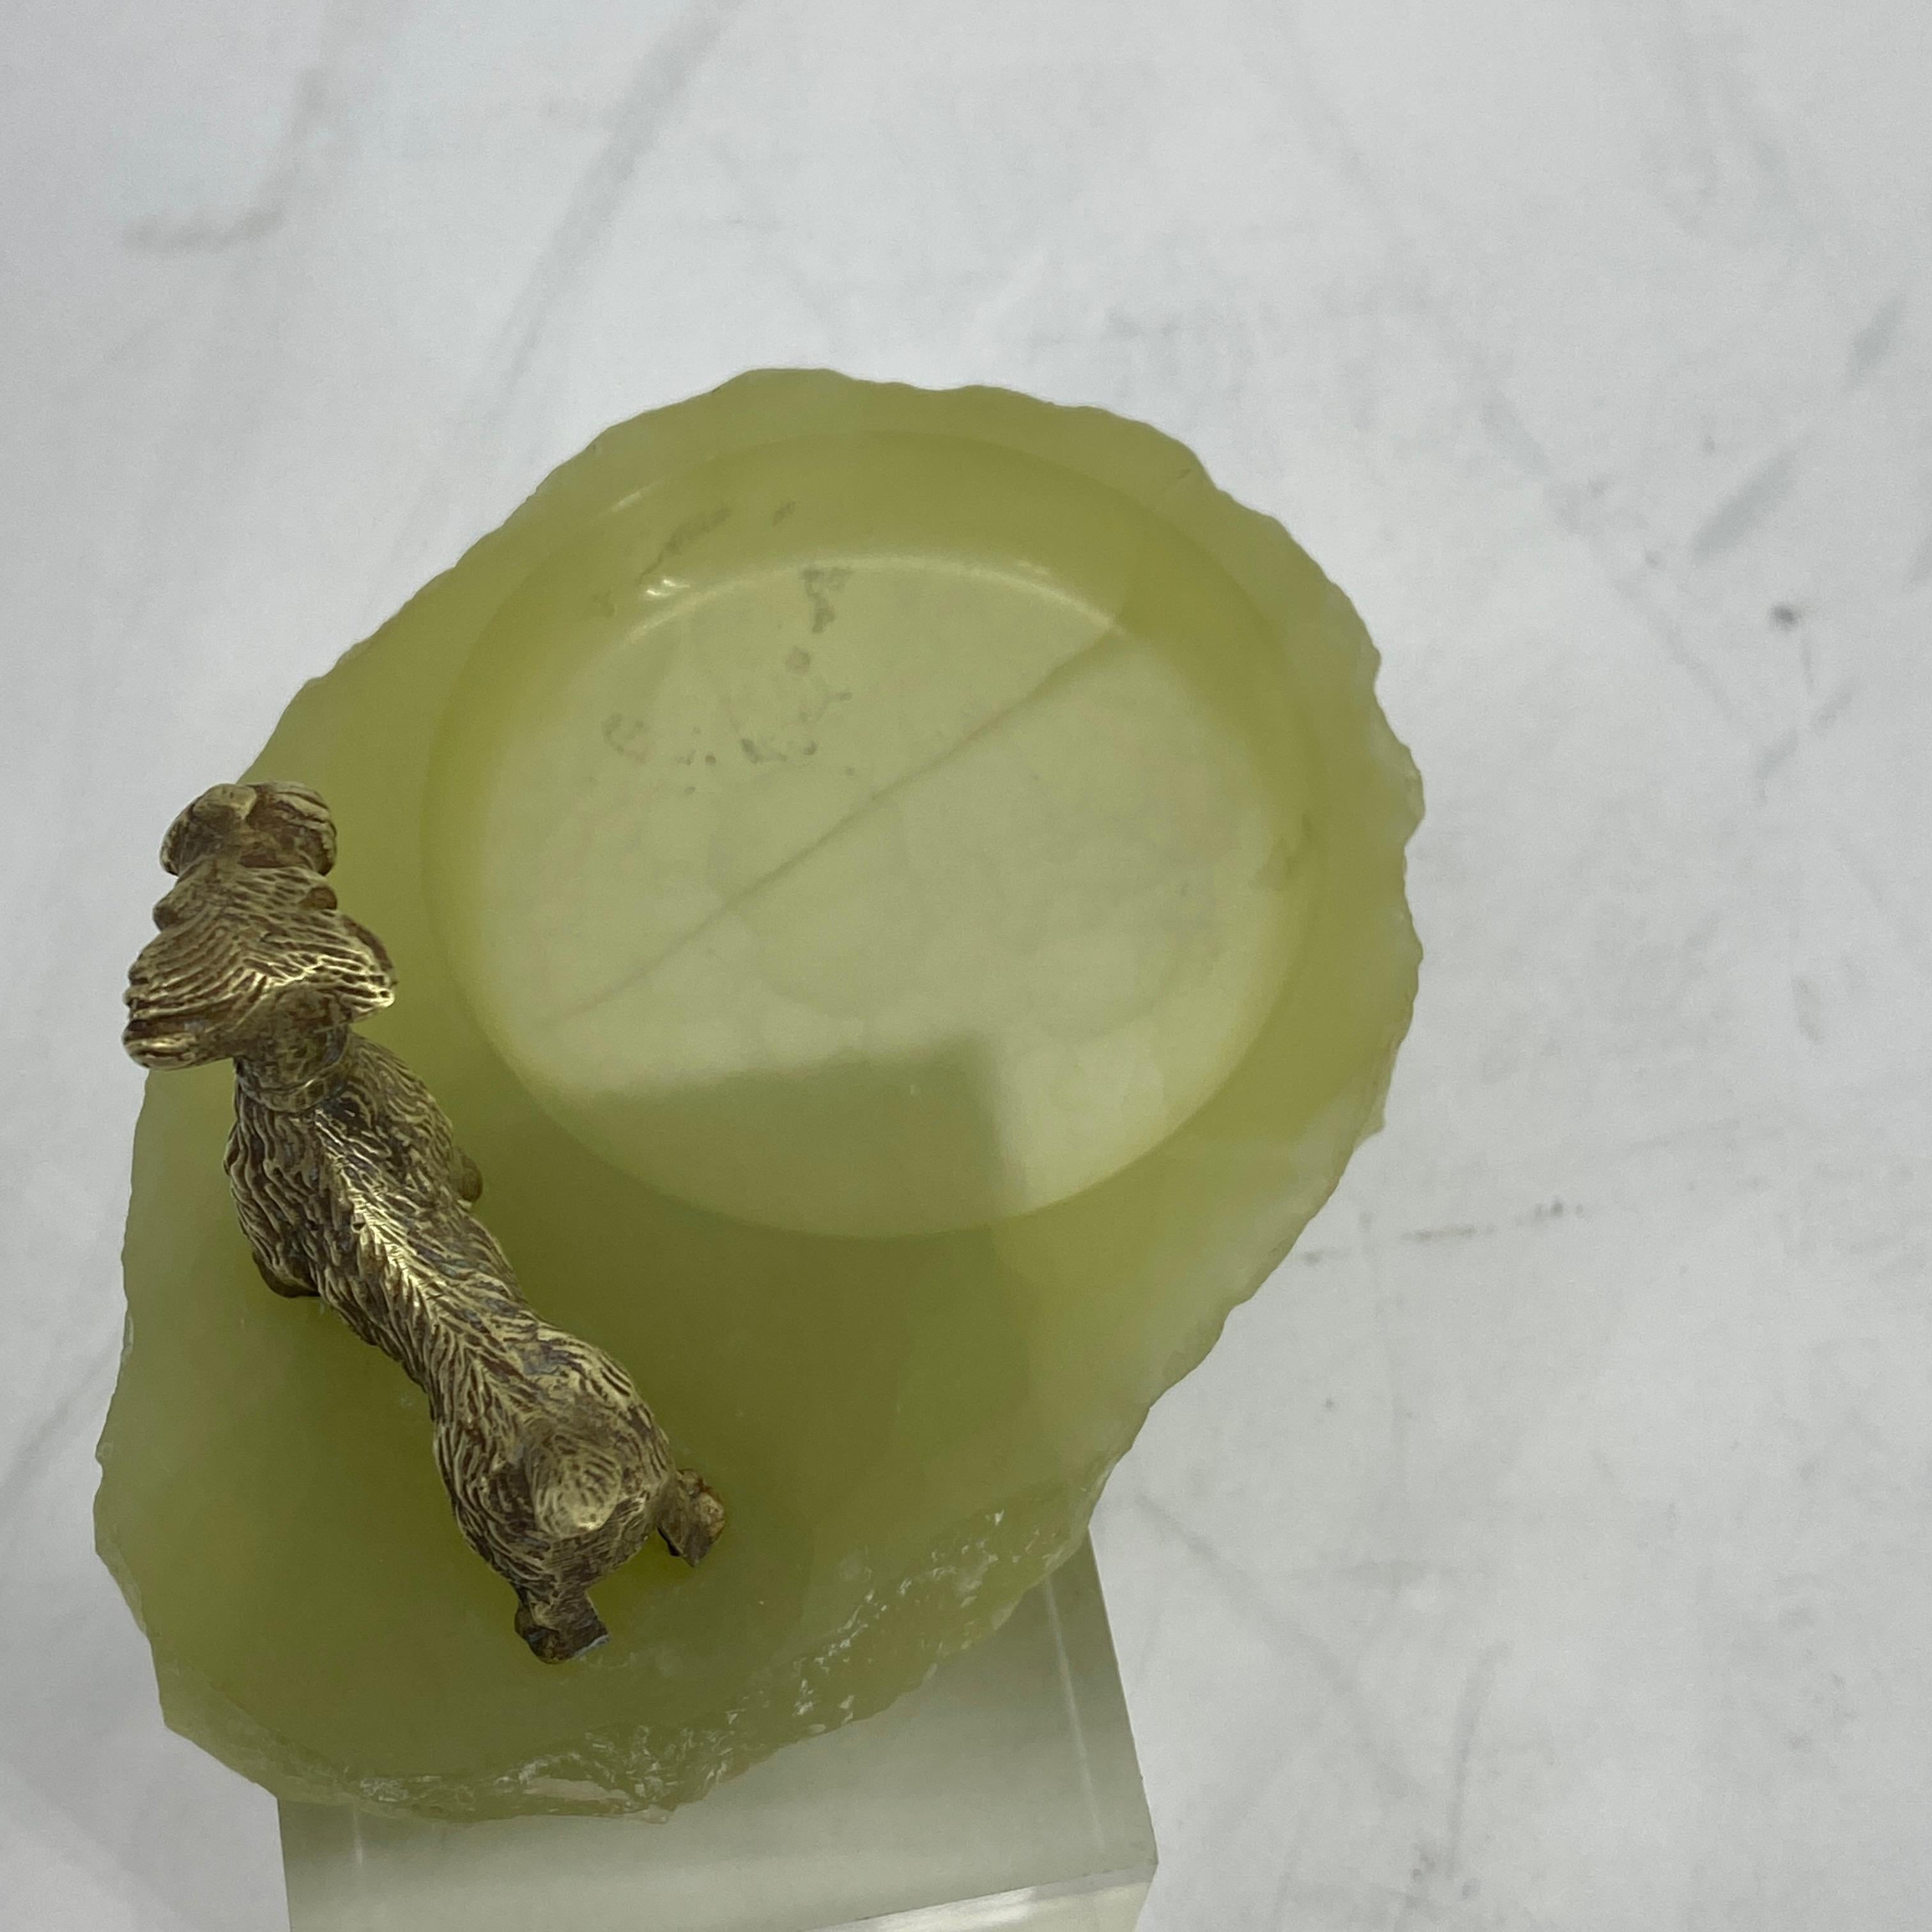 Pistachio Green Onyx and Bronze Terrier Ashtray or Jewelry Tray 5